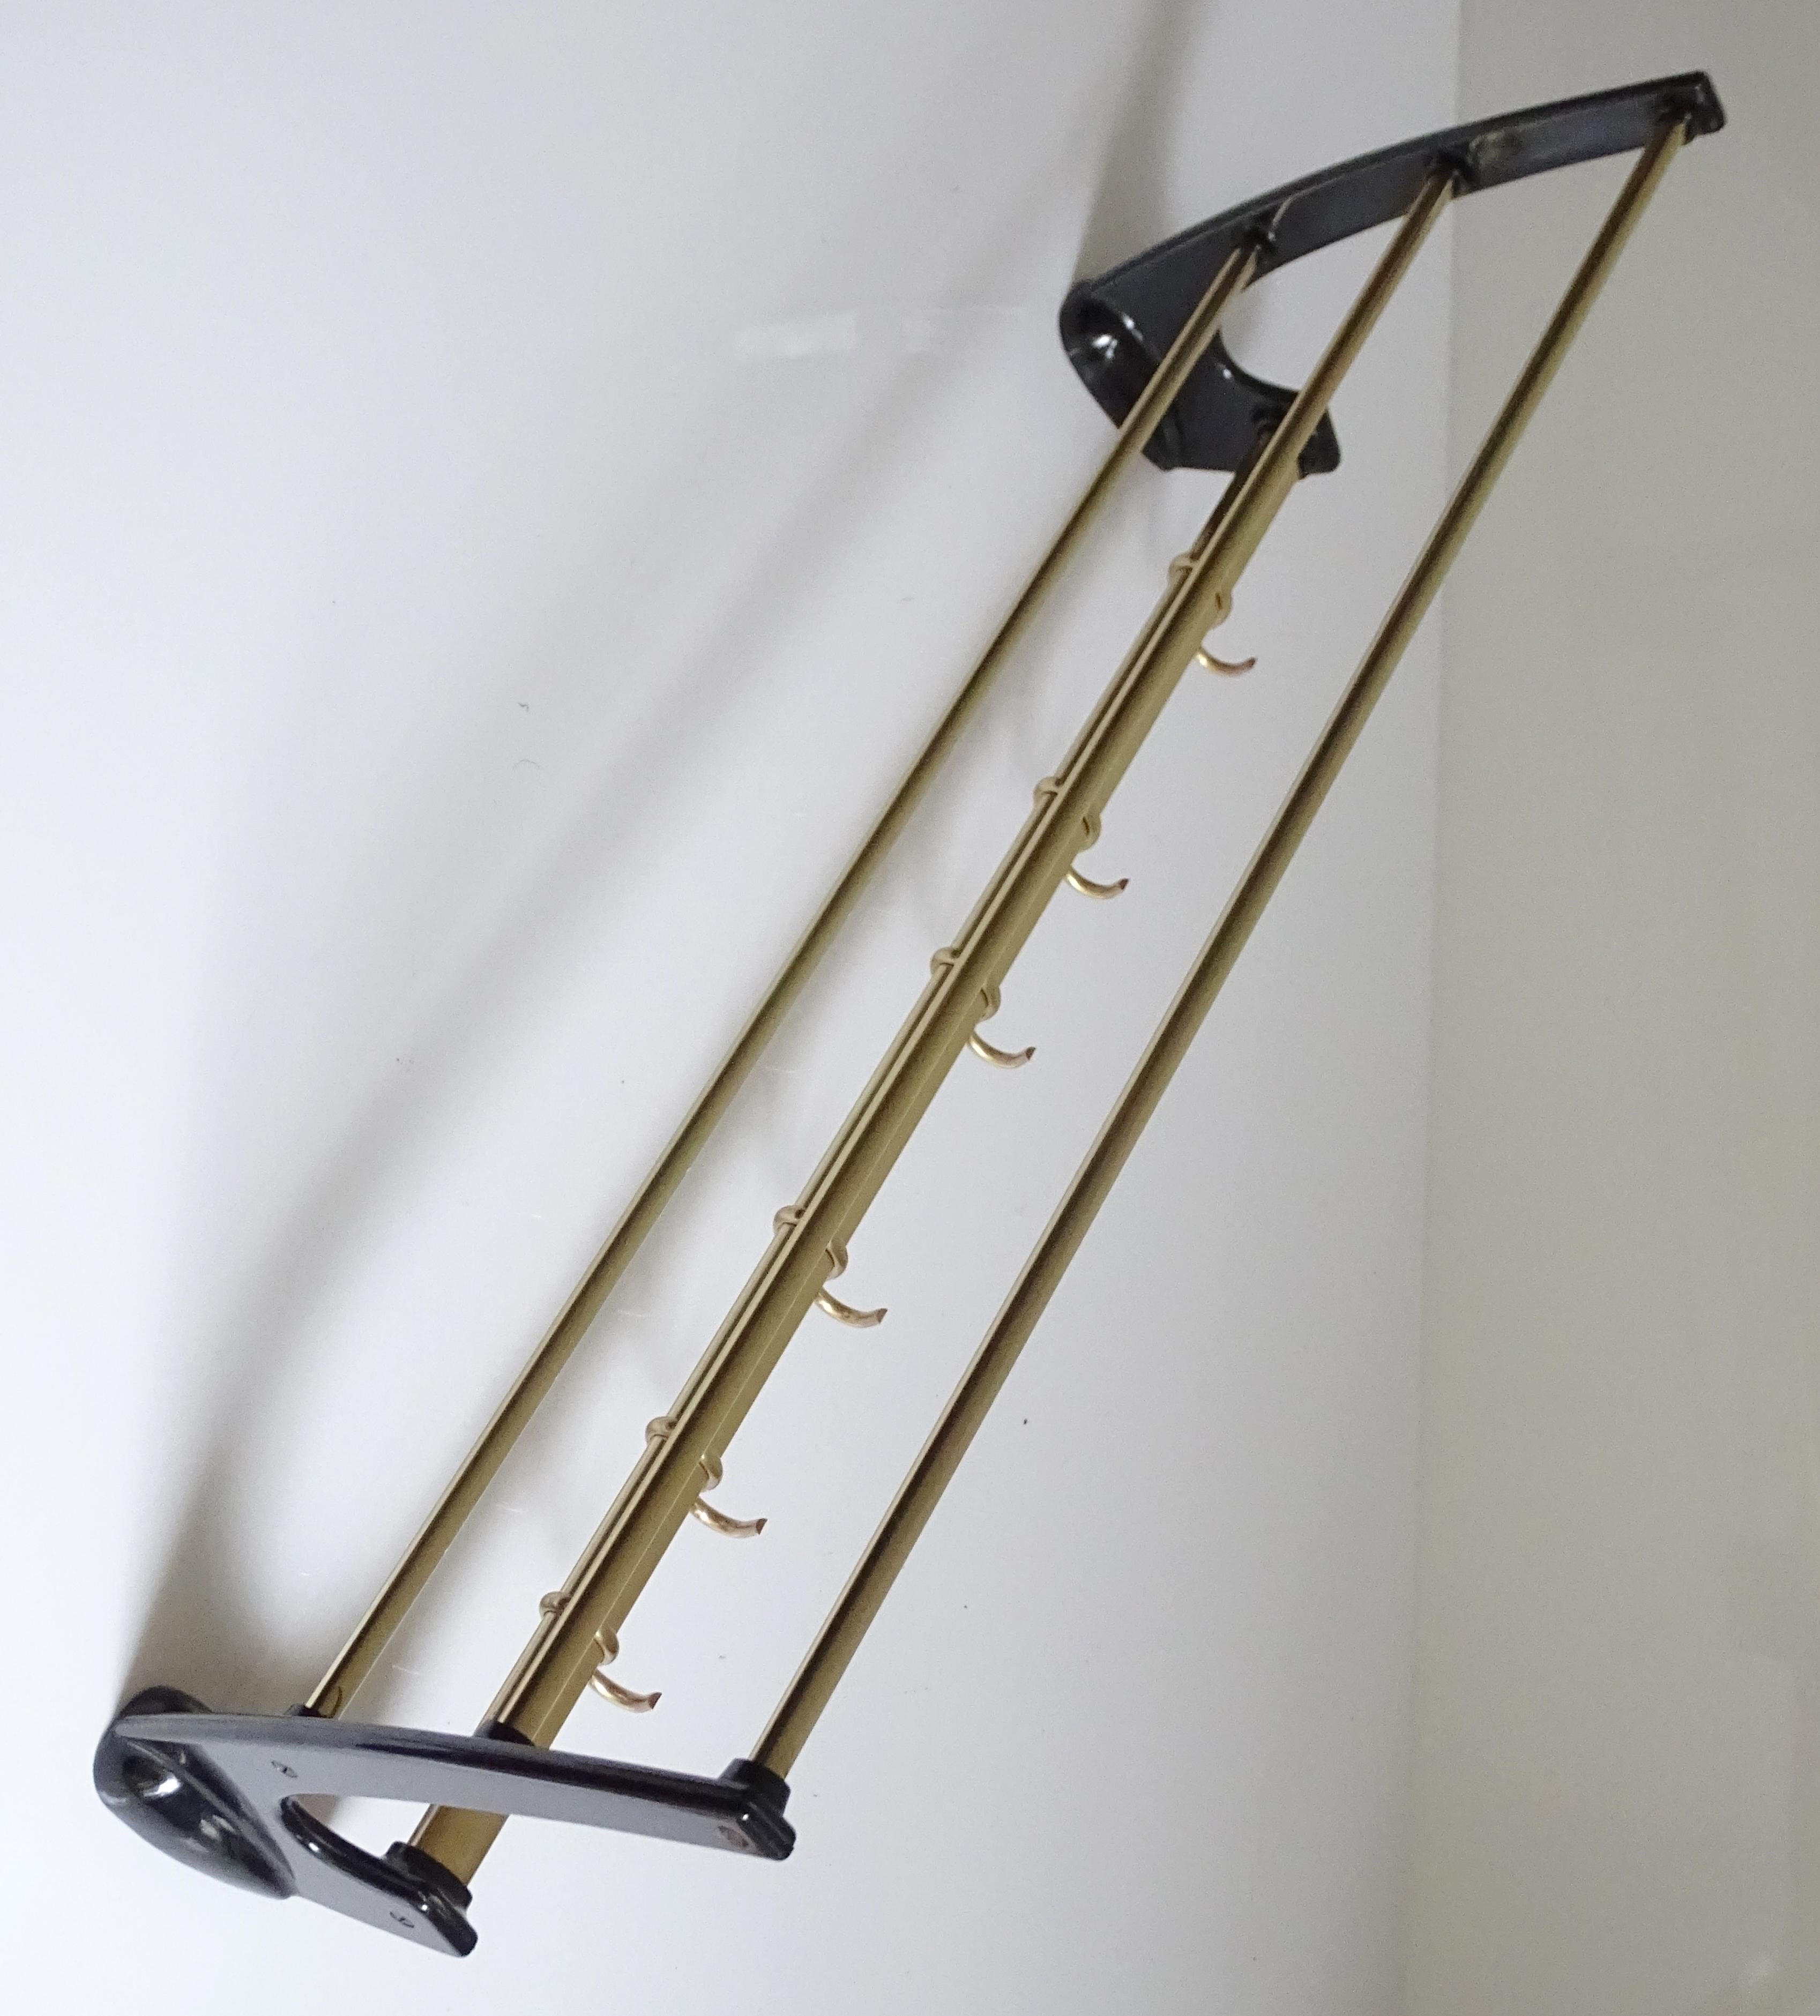 Original midcentury French wall-mount coat and hat rack, very elegant swooping design, made out of brass and black bakelite and six sliding hooks, 
restored and polished
Dimensions:
H 5.91 in. x W 24.81 in. x D 10.24 in.
H 15 cm x W 63 cm x D 26